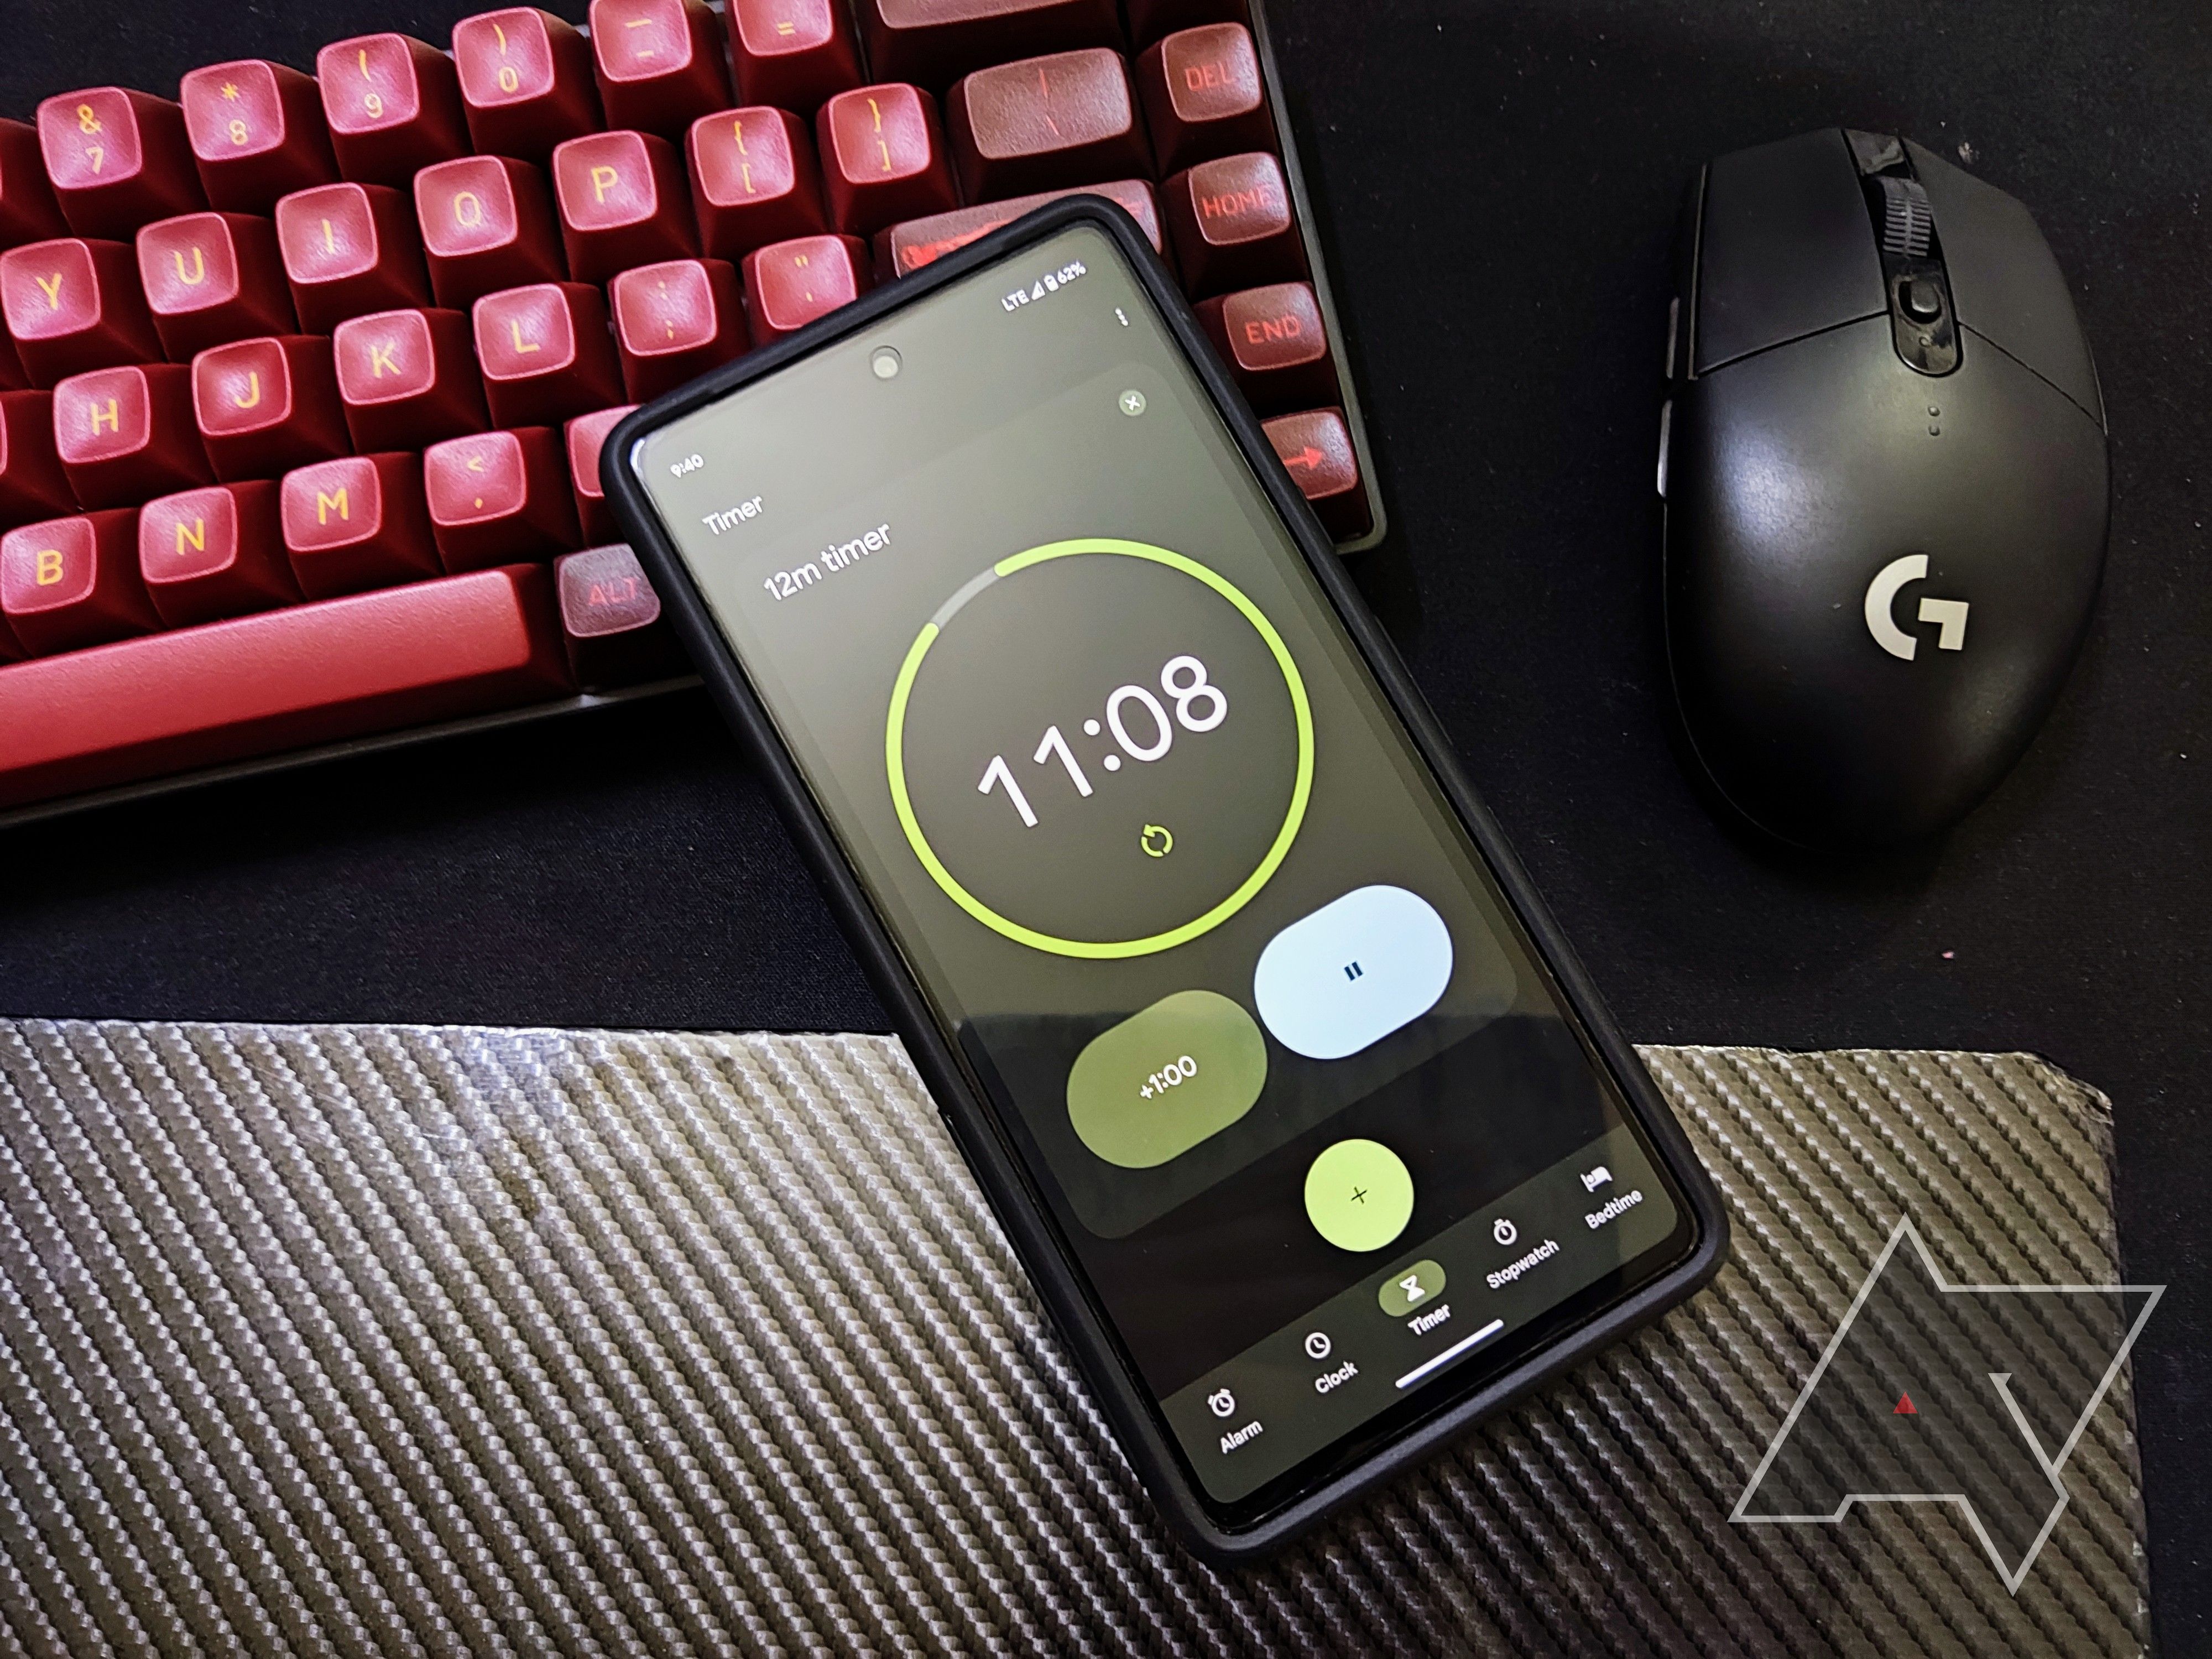 The Google Clock app displayed on a phone screen with a keyboard and mouse in the background